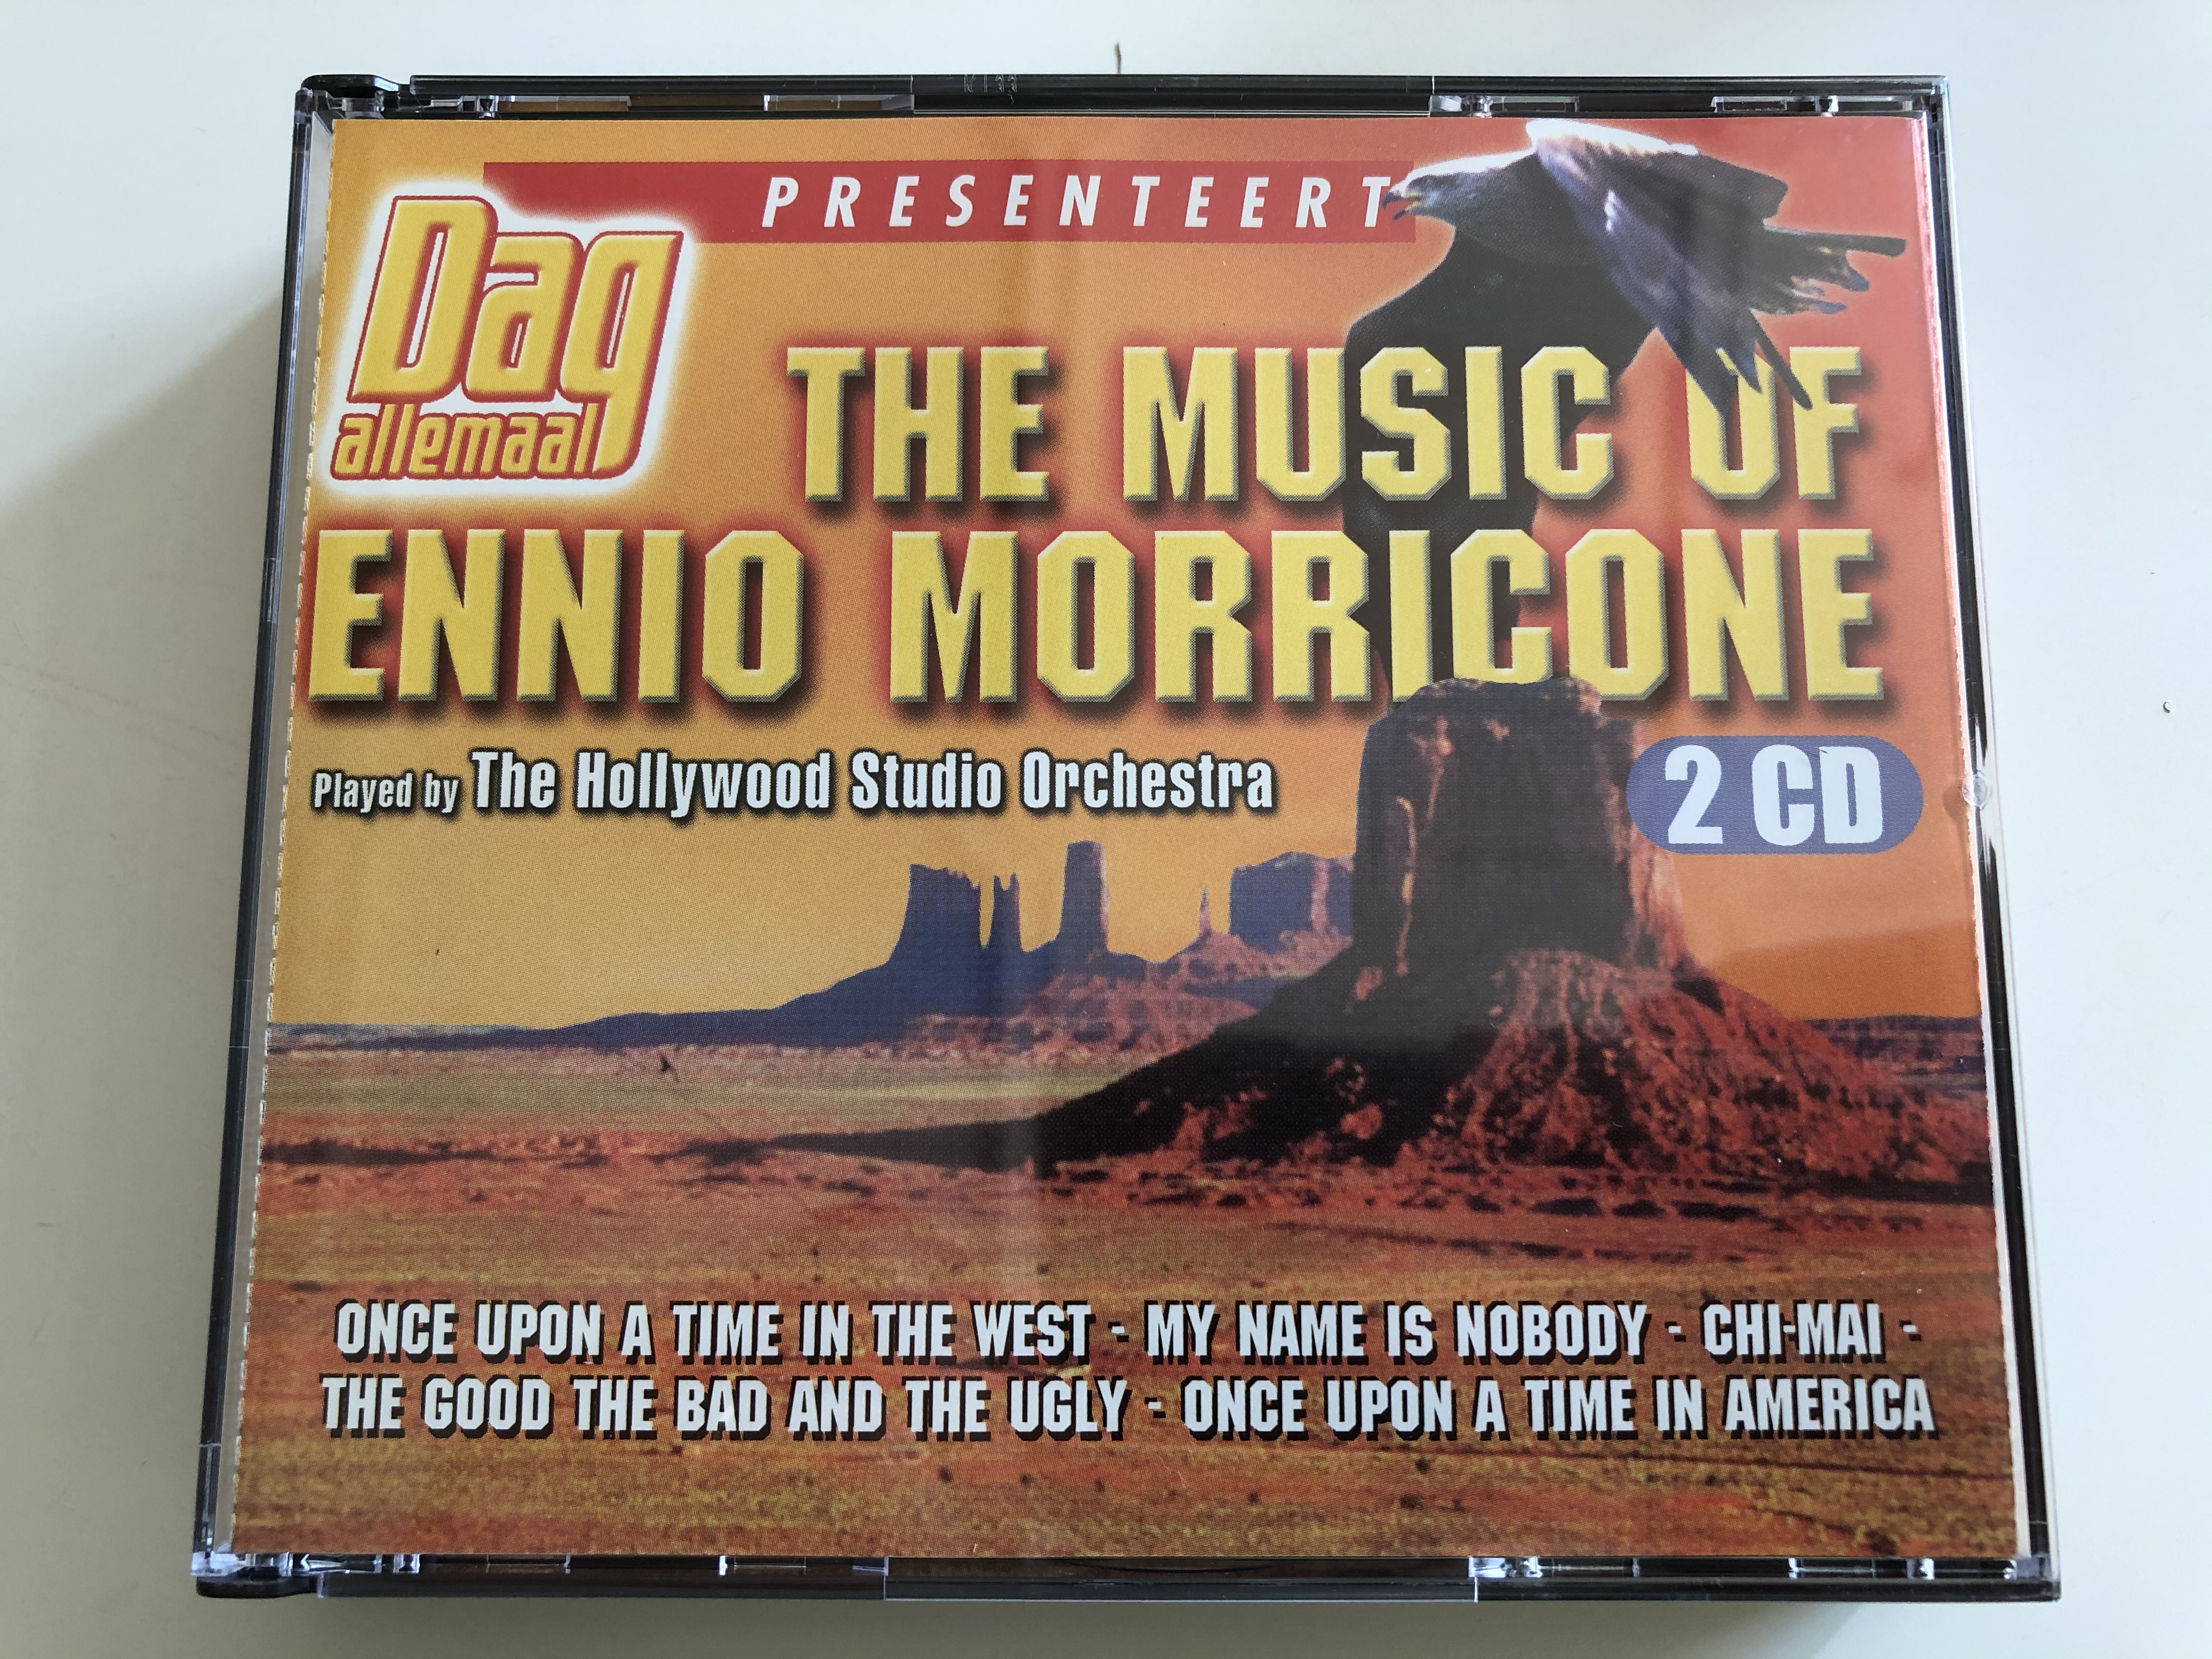 dag-allemaal-the-music-of-ennio-morricone-played-by-the-hollywood-studio-orchestra-once-upon-a-time-in-the-west-my-name-is-nobody-chi-mai-the-good-the-bad-and-the-ugly-once-upon-a-time-1-.jpg